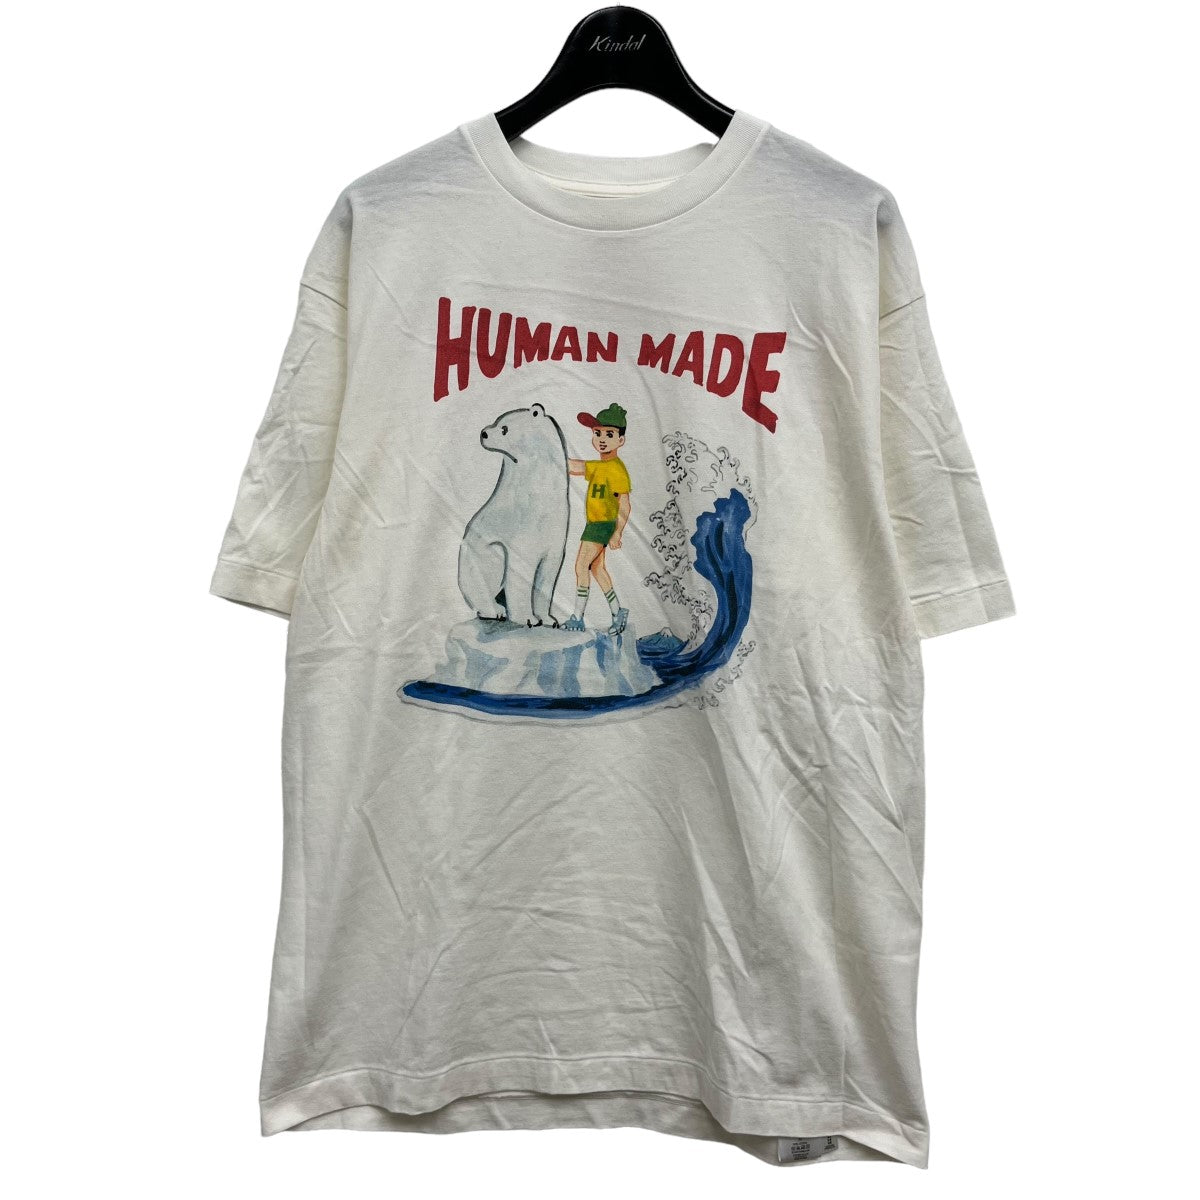 HUMAN MADE(ヒューマンメード) 2022AW KEIKO SOOTOME T-SHIRT プリント 